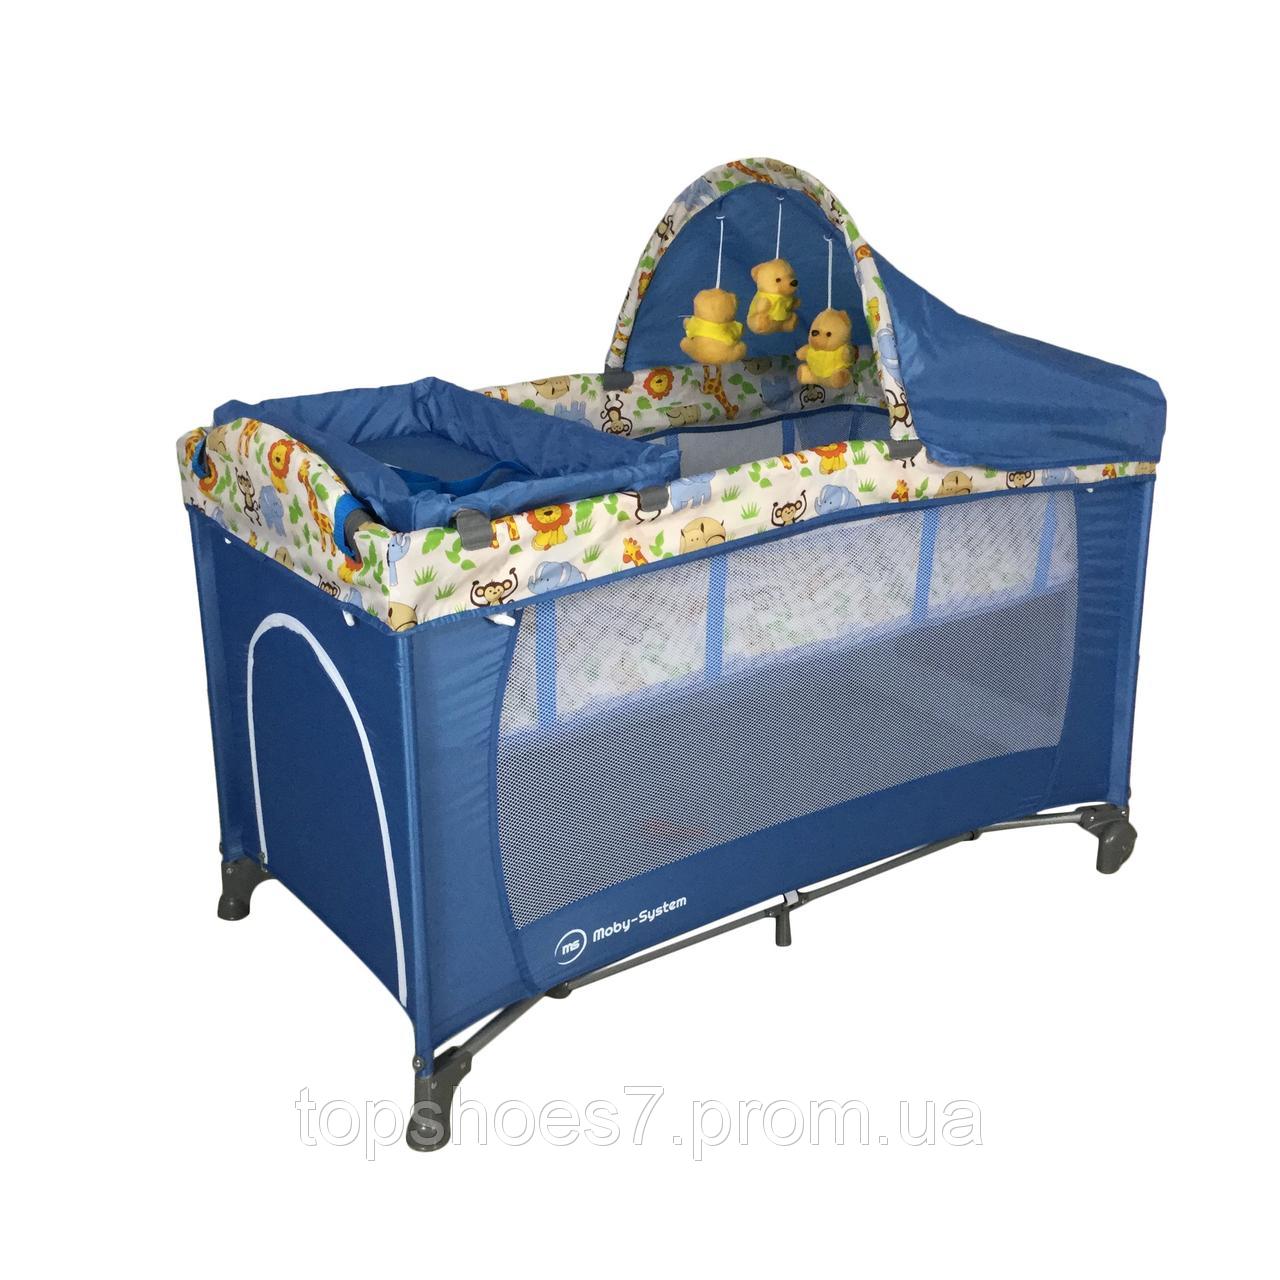 Types of playpens with a berth